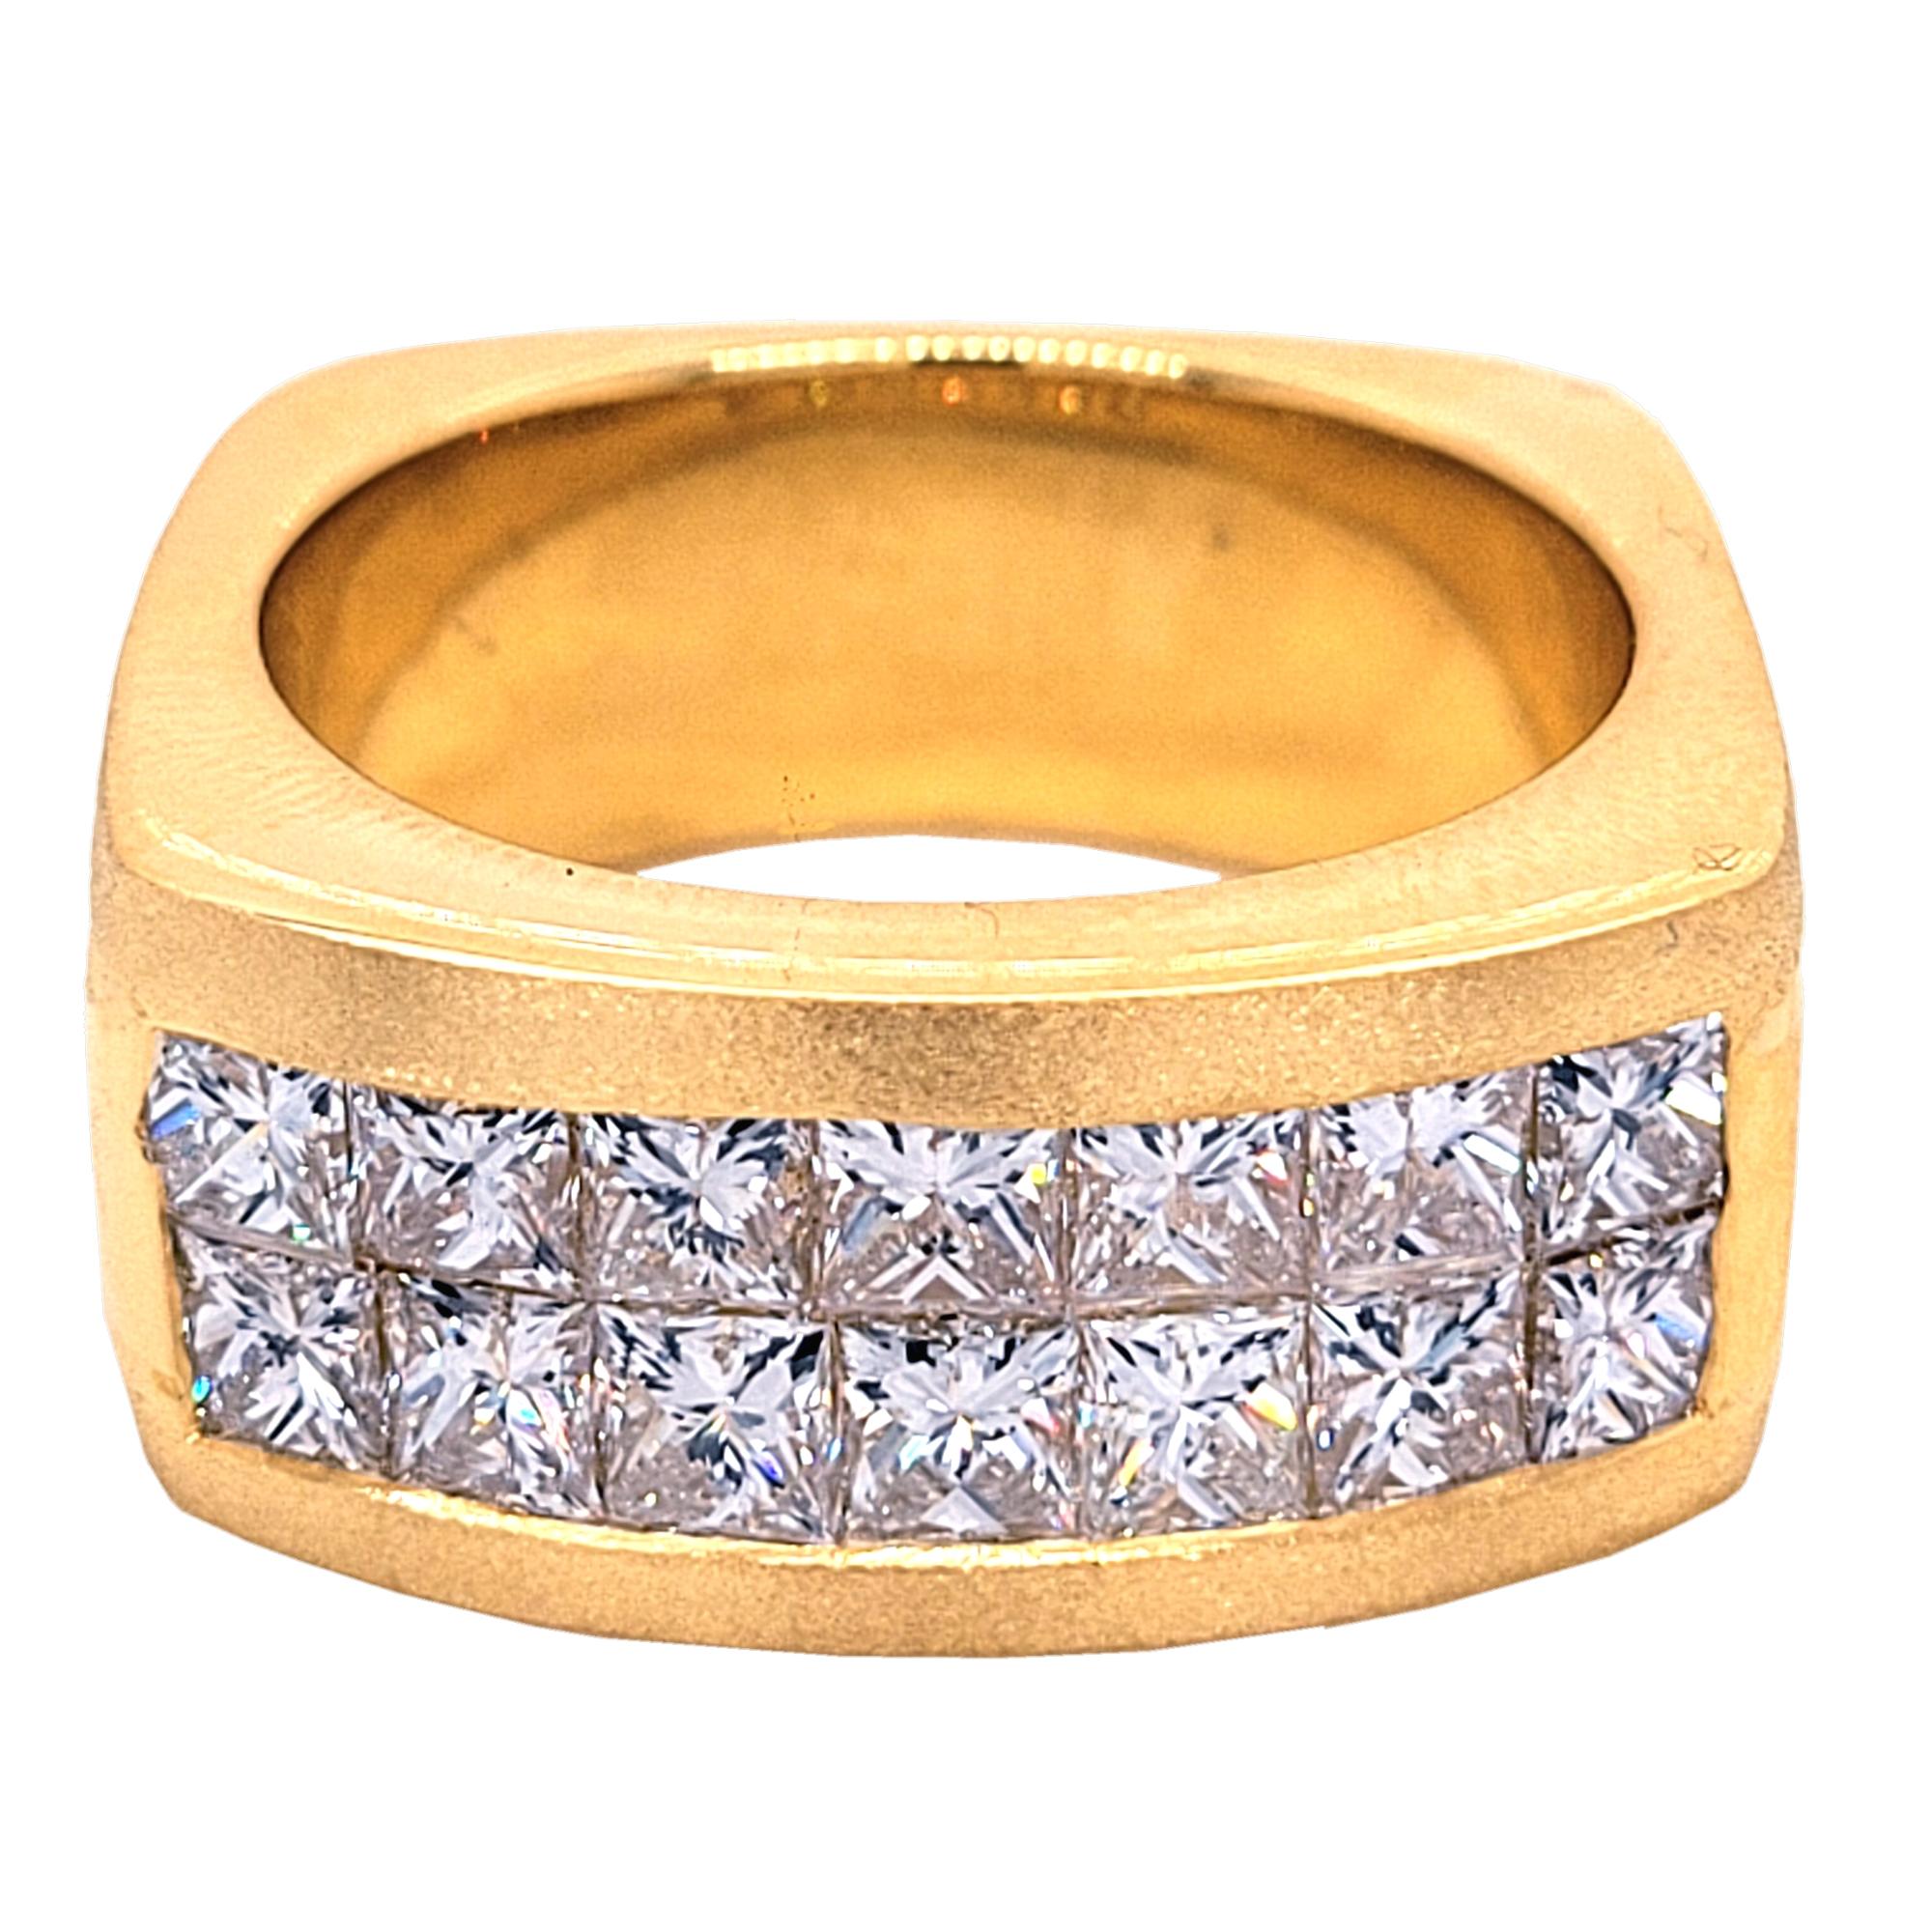 This Beautiful Gent's ring is made in 18K Yellow gold with shiny middle and matted sides. It has 14 pieces of perfectly matched 3.4 mm princess cut diamonds (Total Weight 3.46 Ct) invisible set on the top. The ring is square shaped shank.
Total